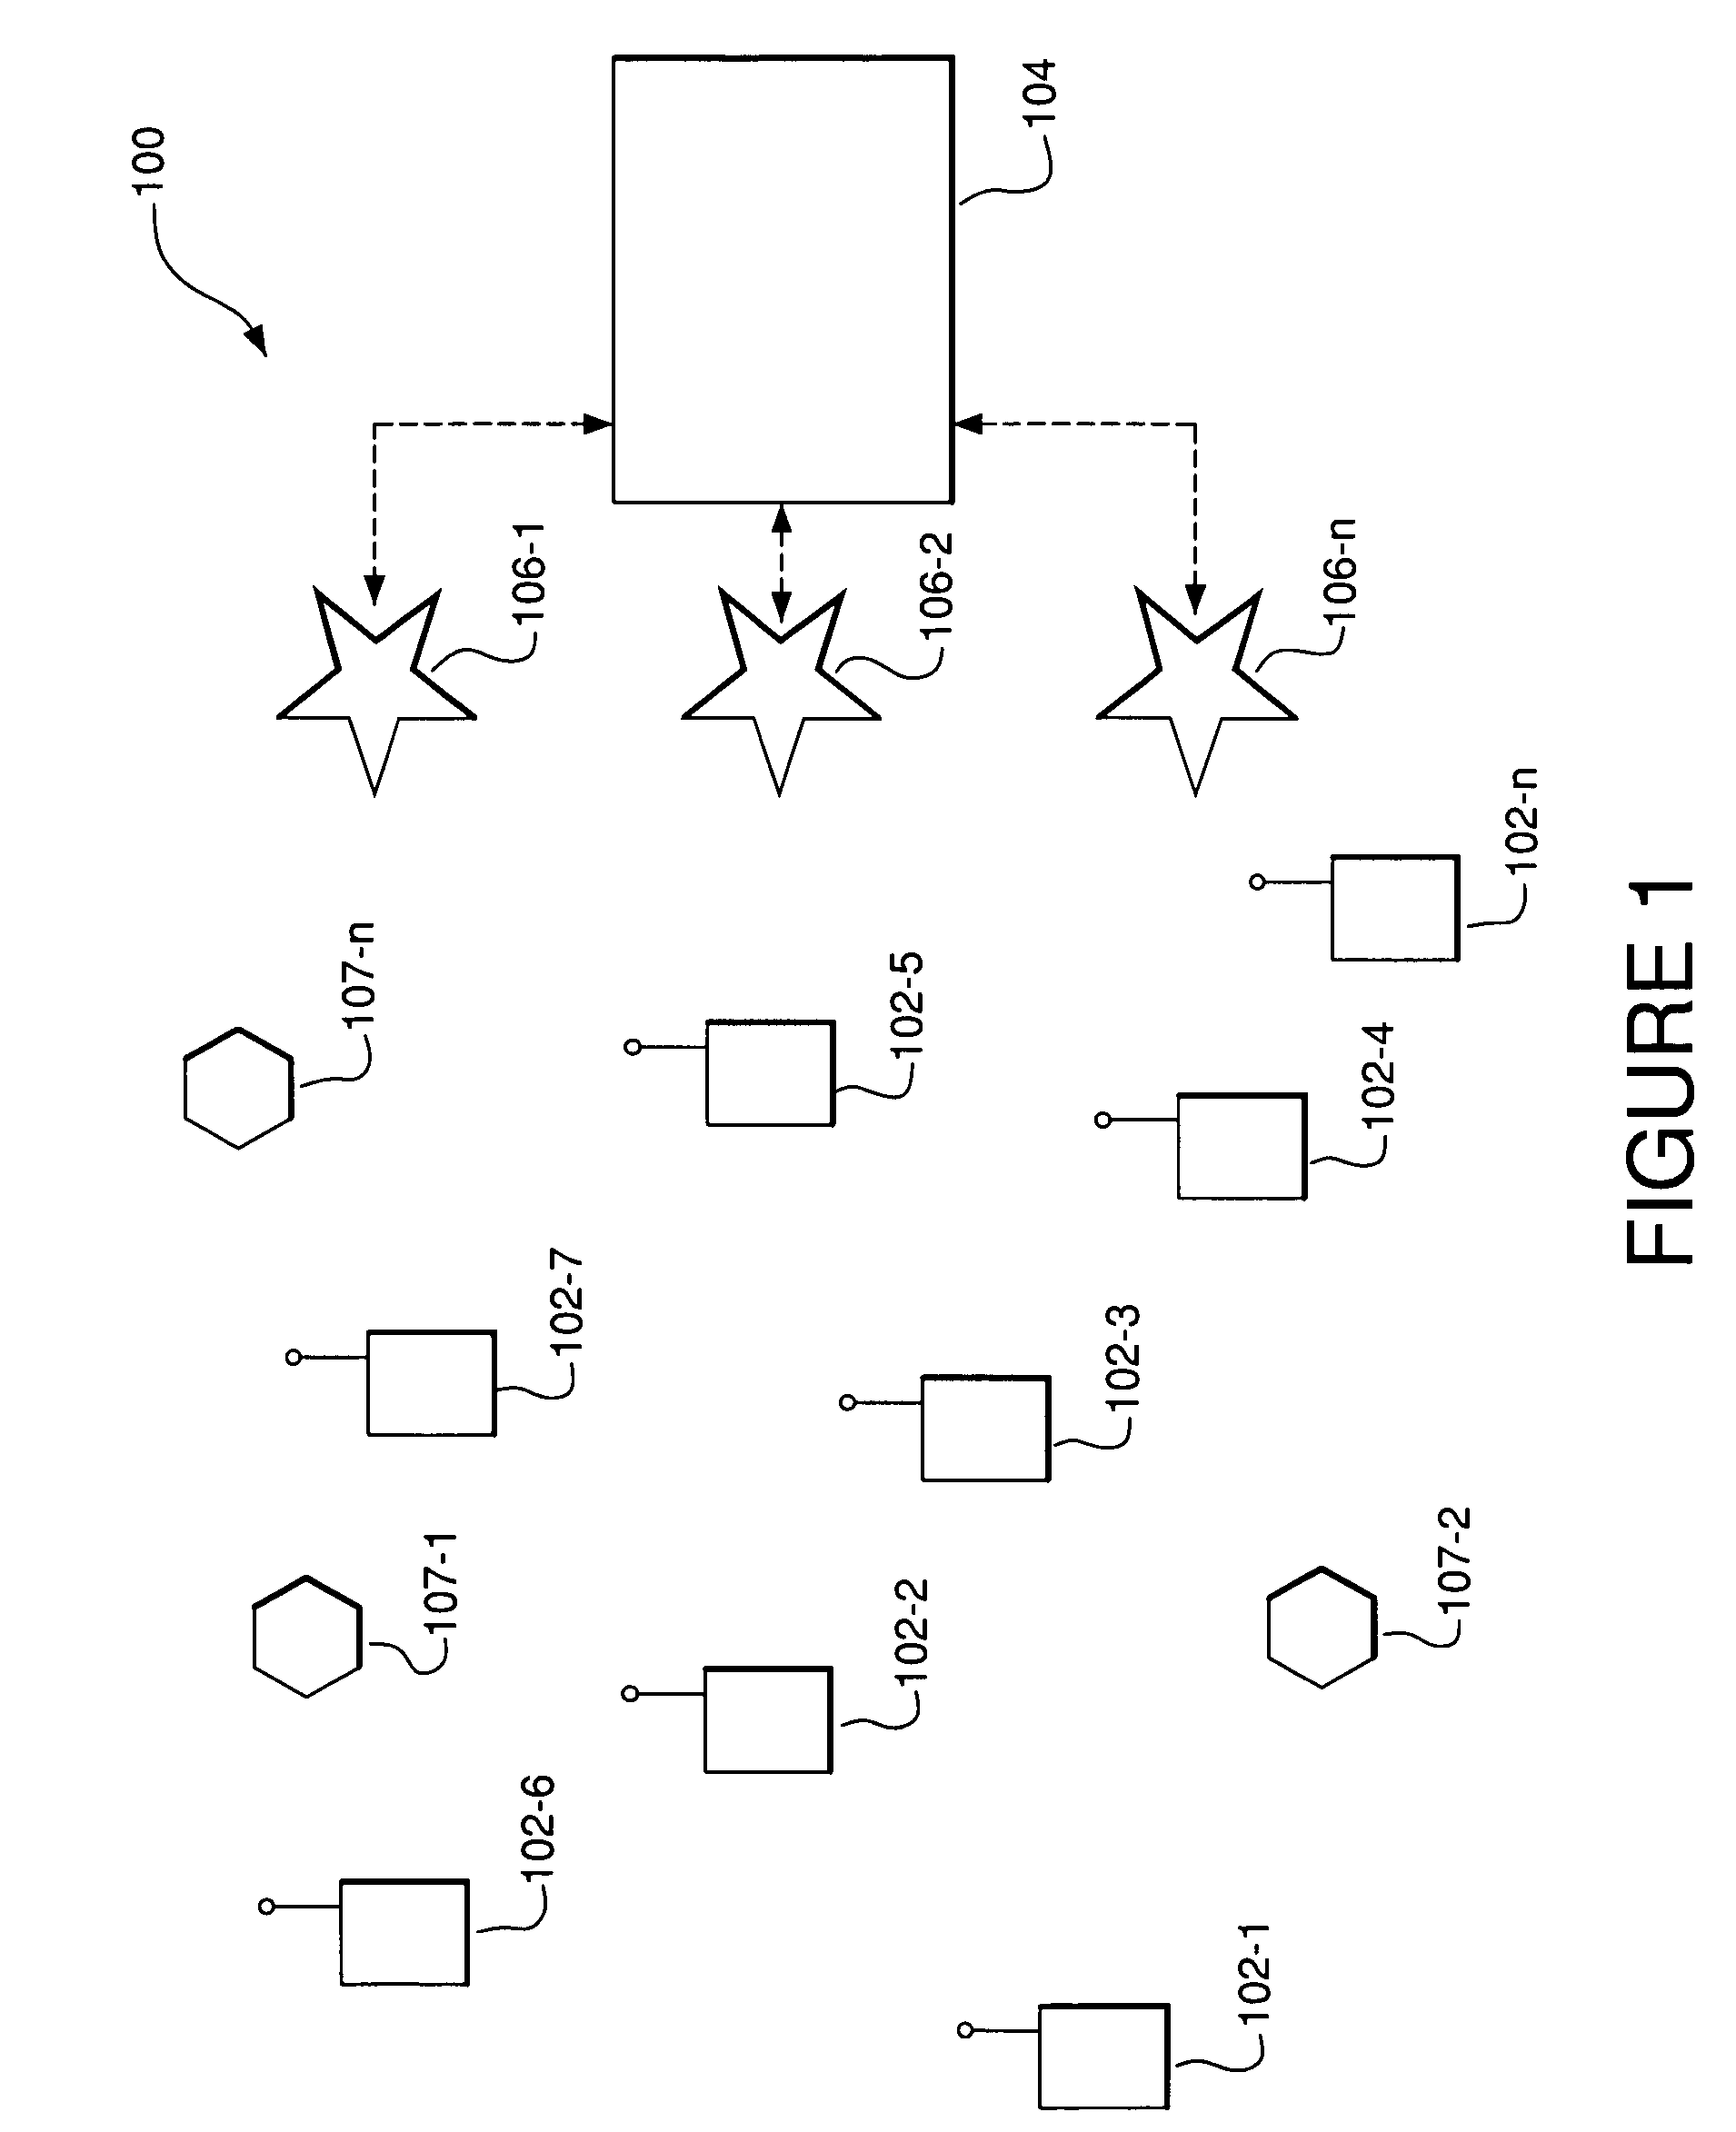 Method to provide a measure of link reliability to a routing protocol in an ad hoc wireless network